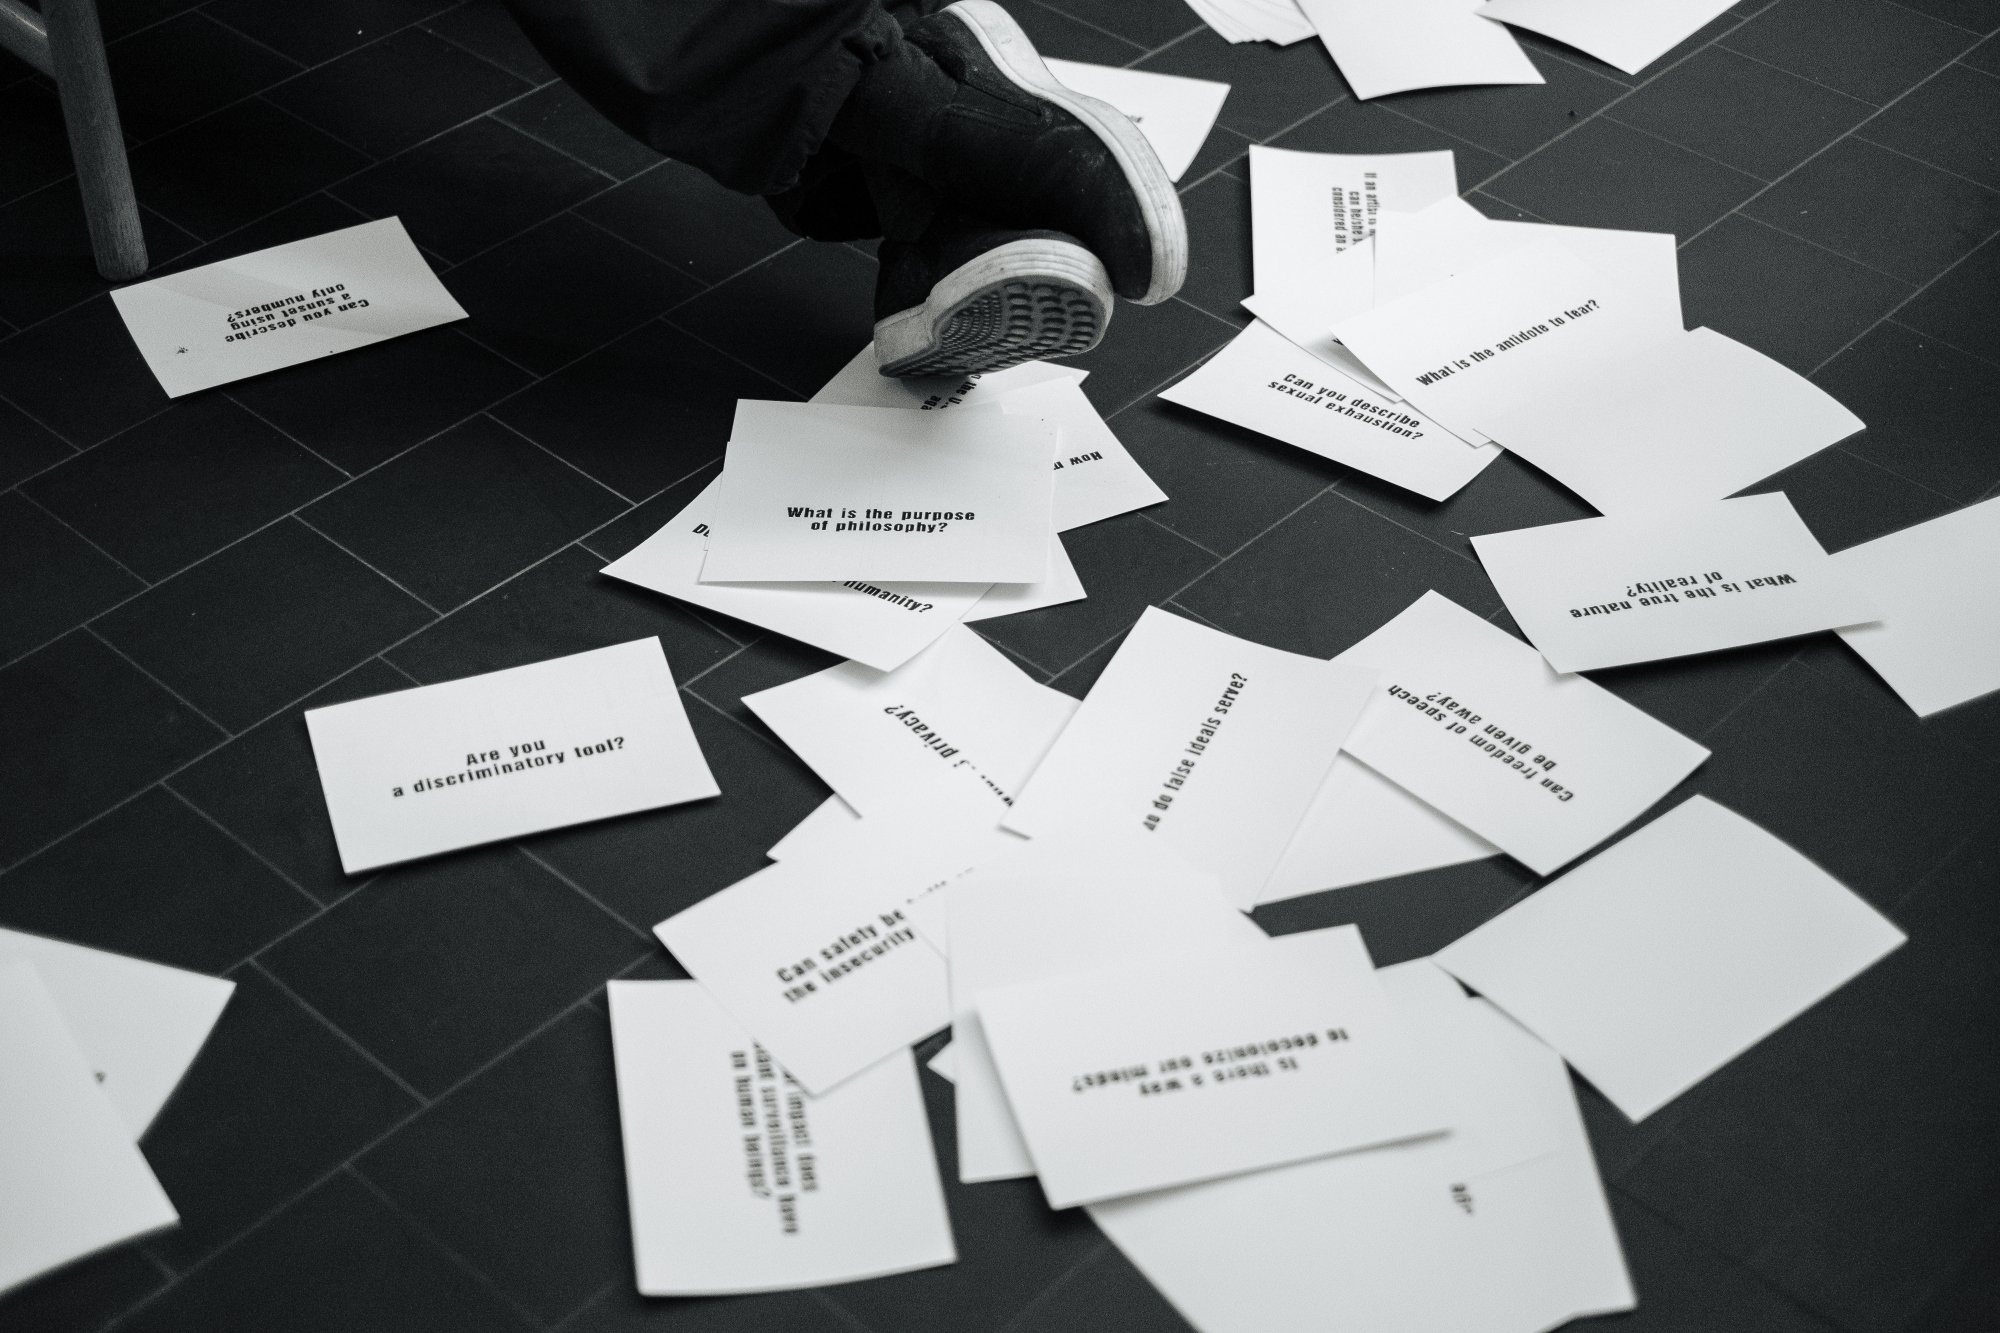 Loose papers on a floor presenting questions by Ai Weiwei.